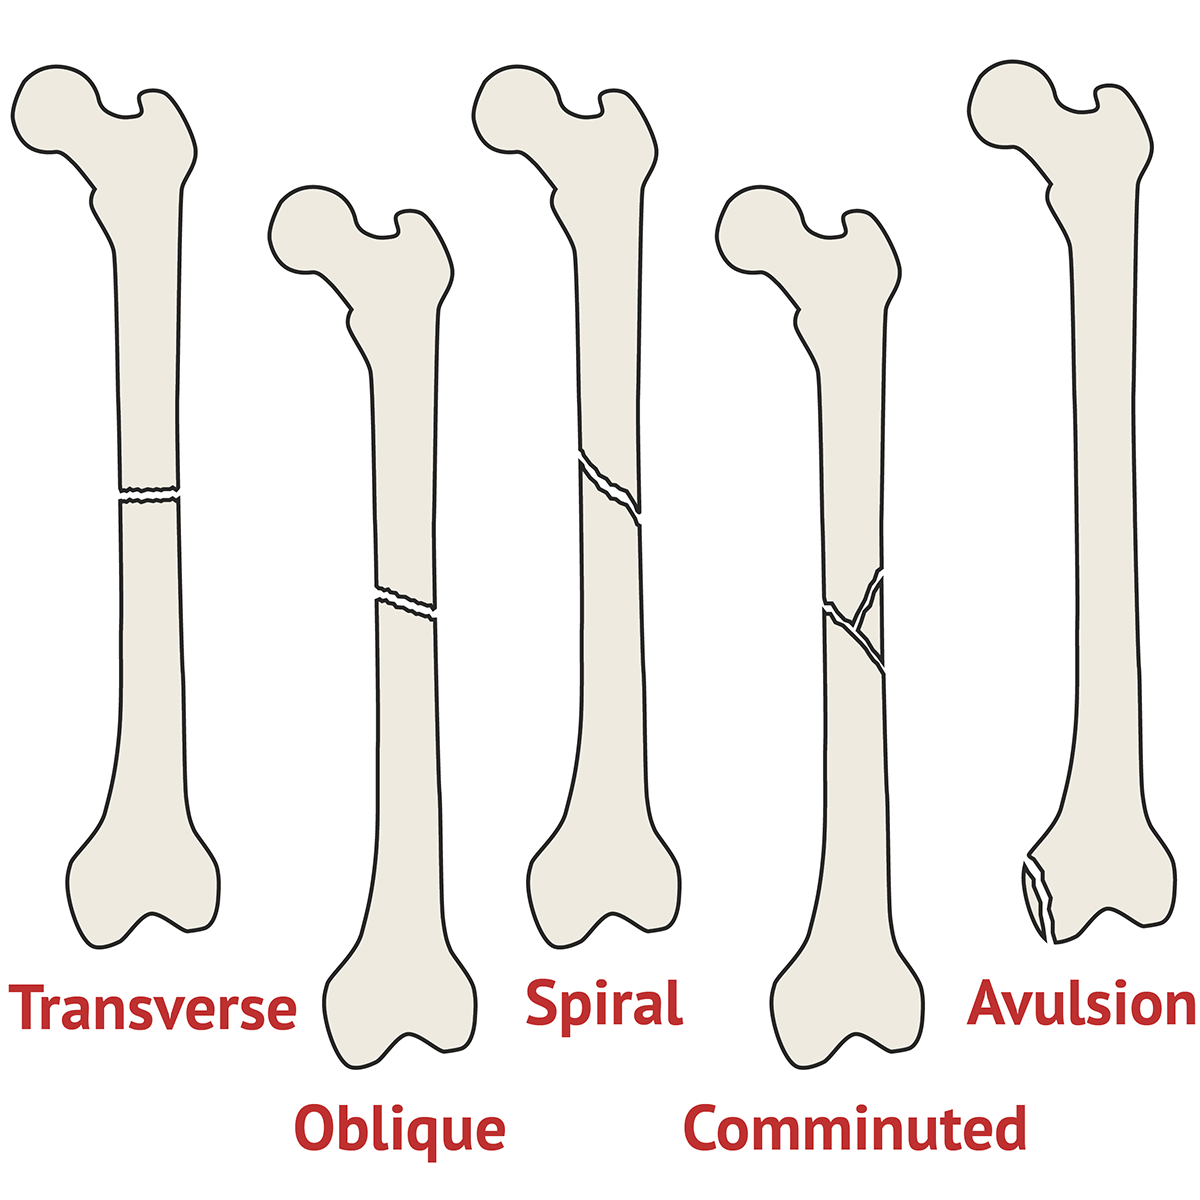 Different Types Of Fractures